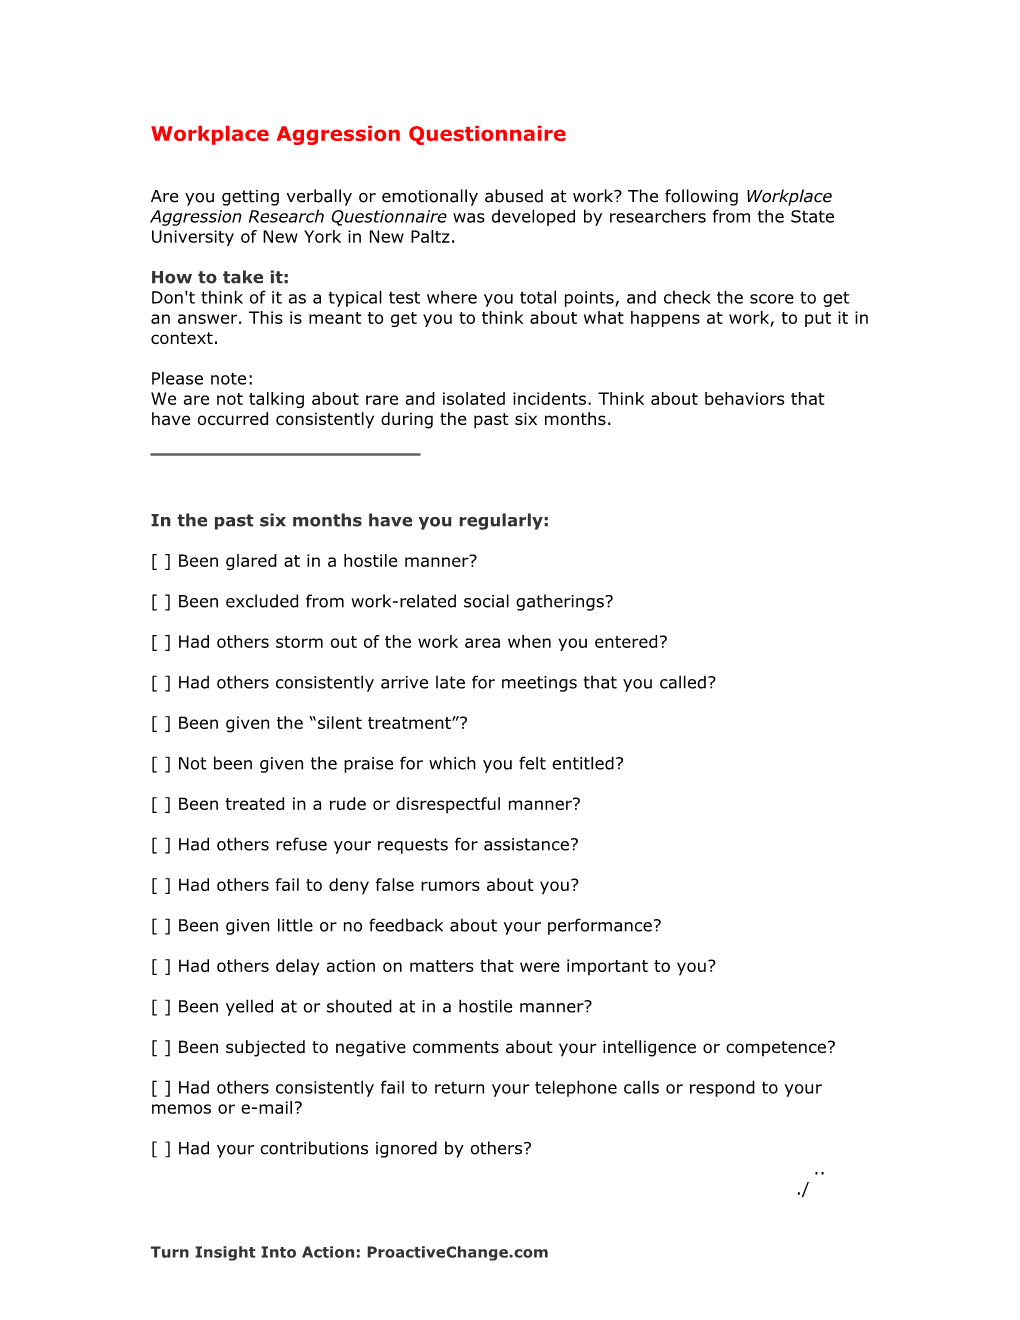 Workplace Aggression Questionnaire